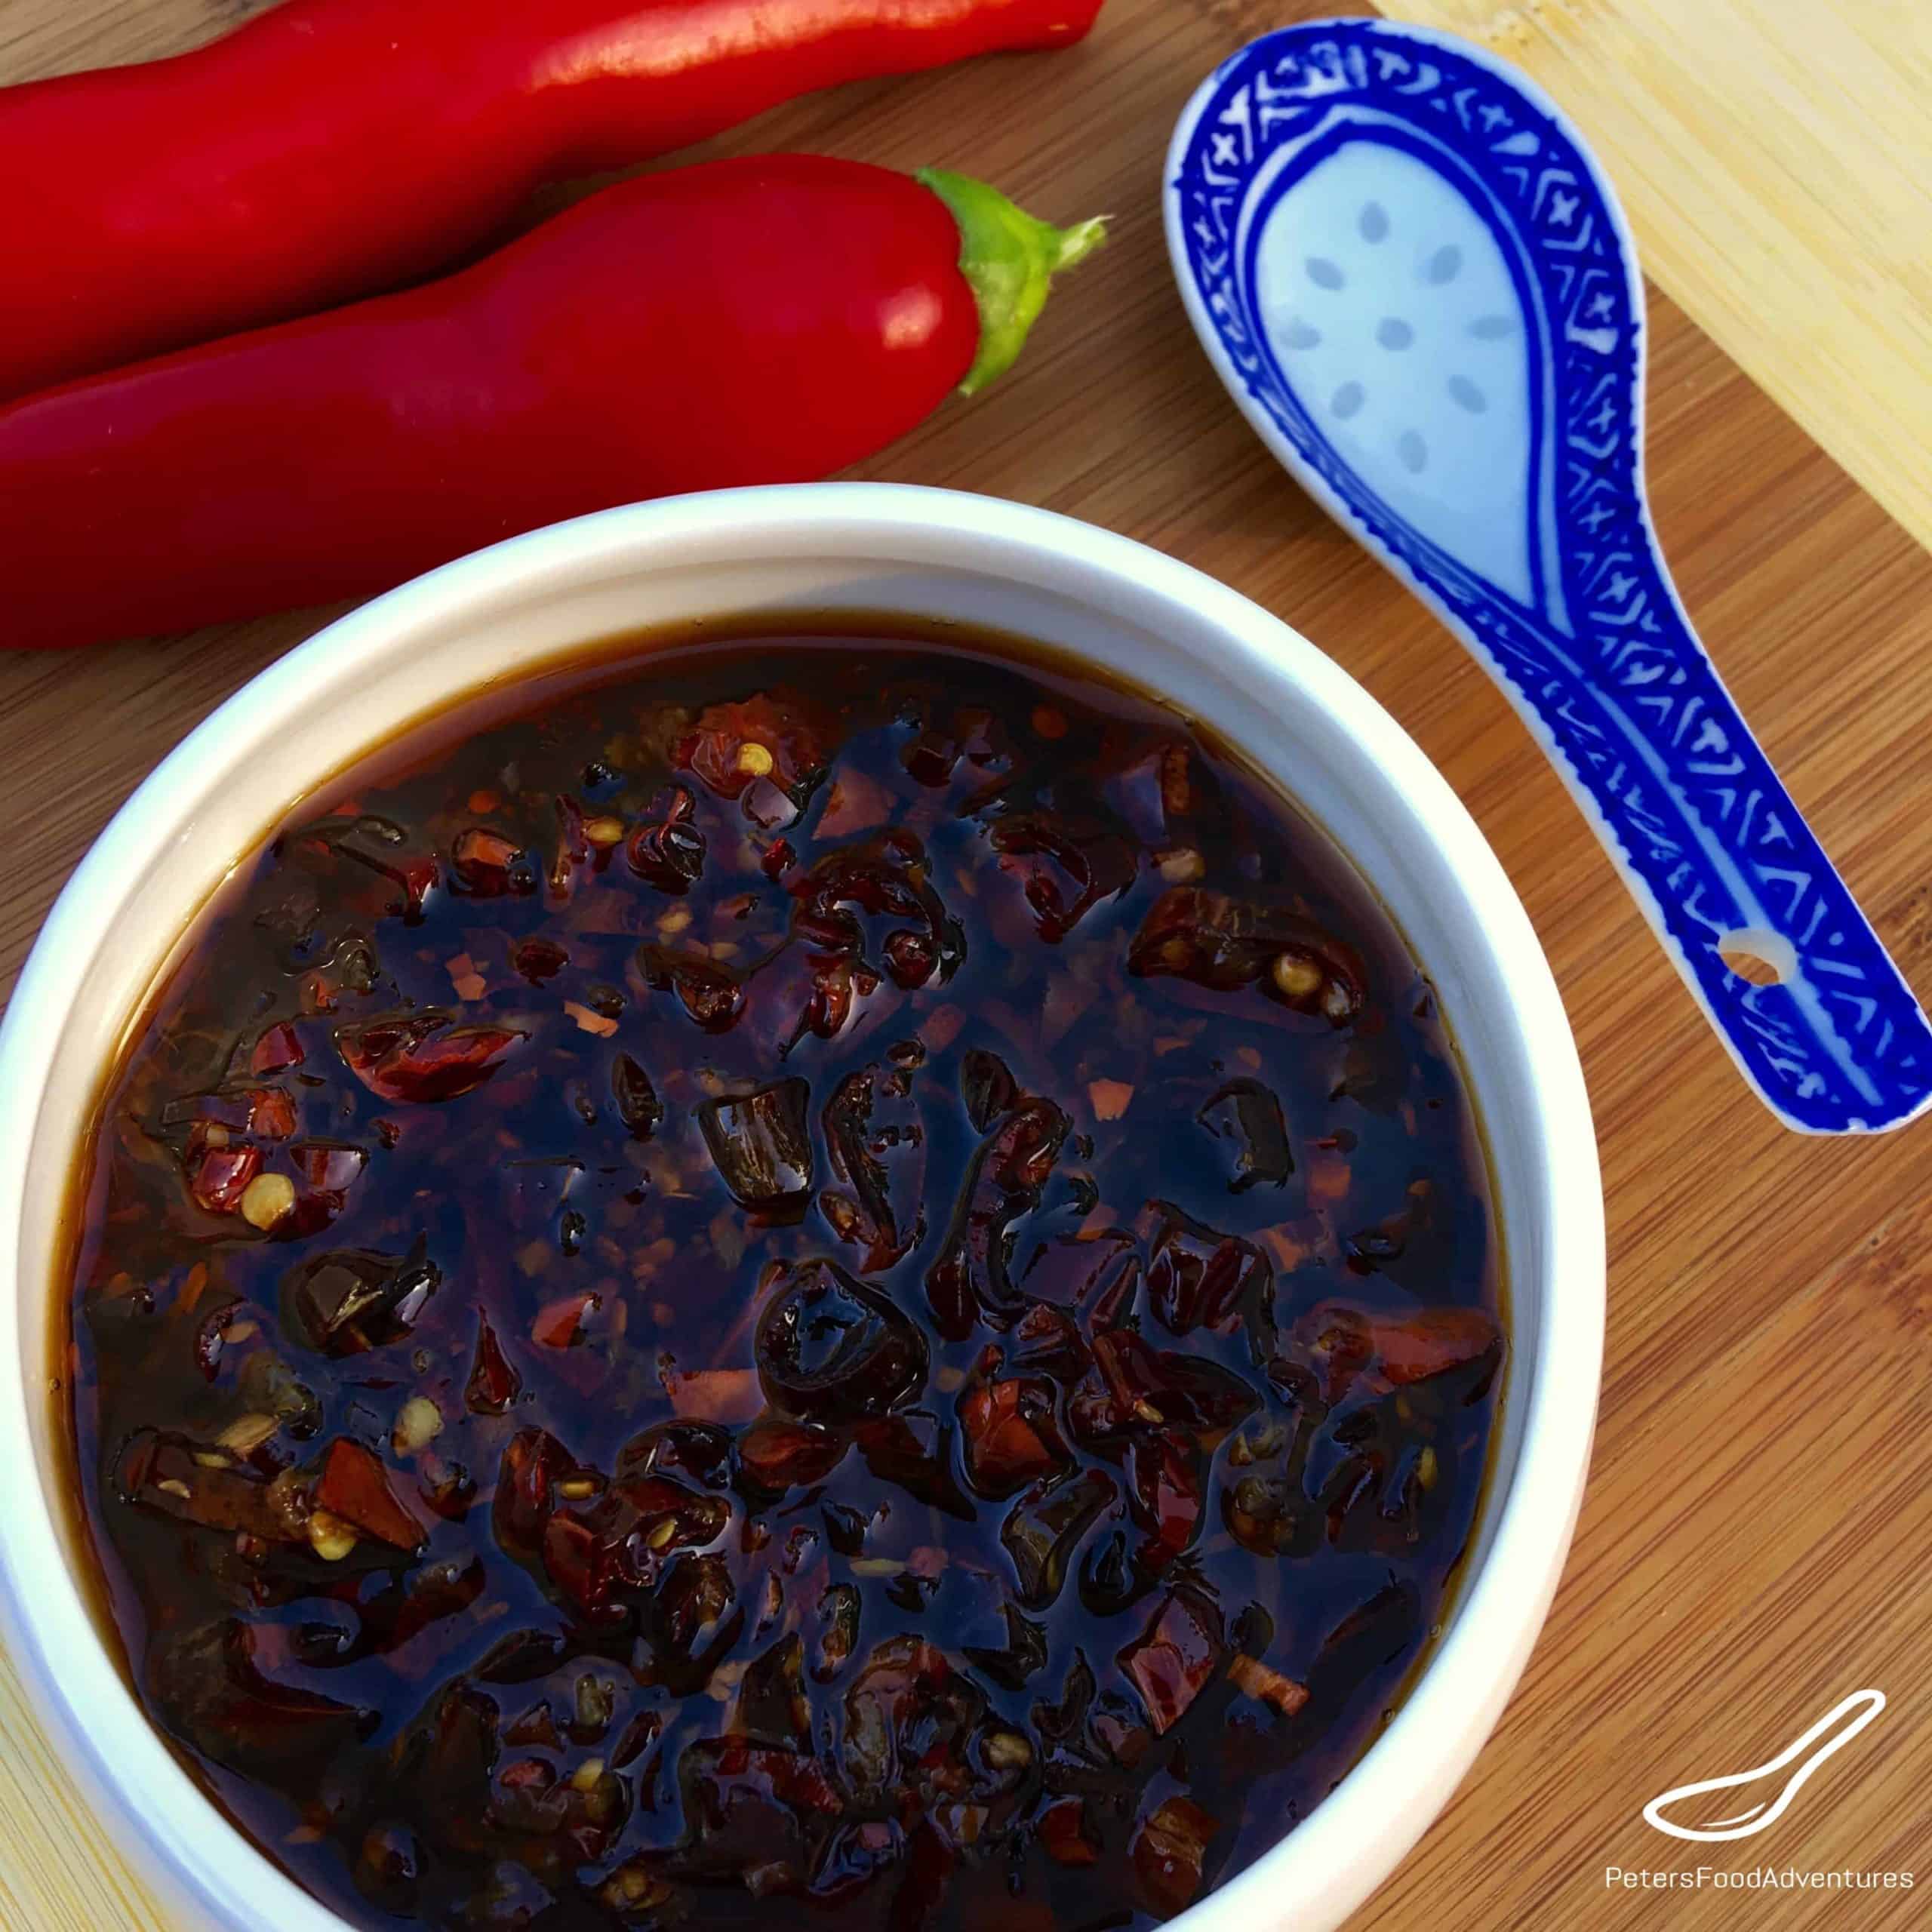 If you love Sriracha, you will love this Asian Chili Sauce called Lazadzhan. Enjoy it with stir fry, dumplings or anything that needs a chili garlic flavour explosion! Lazadzhan (Лазаджан)